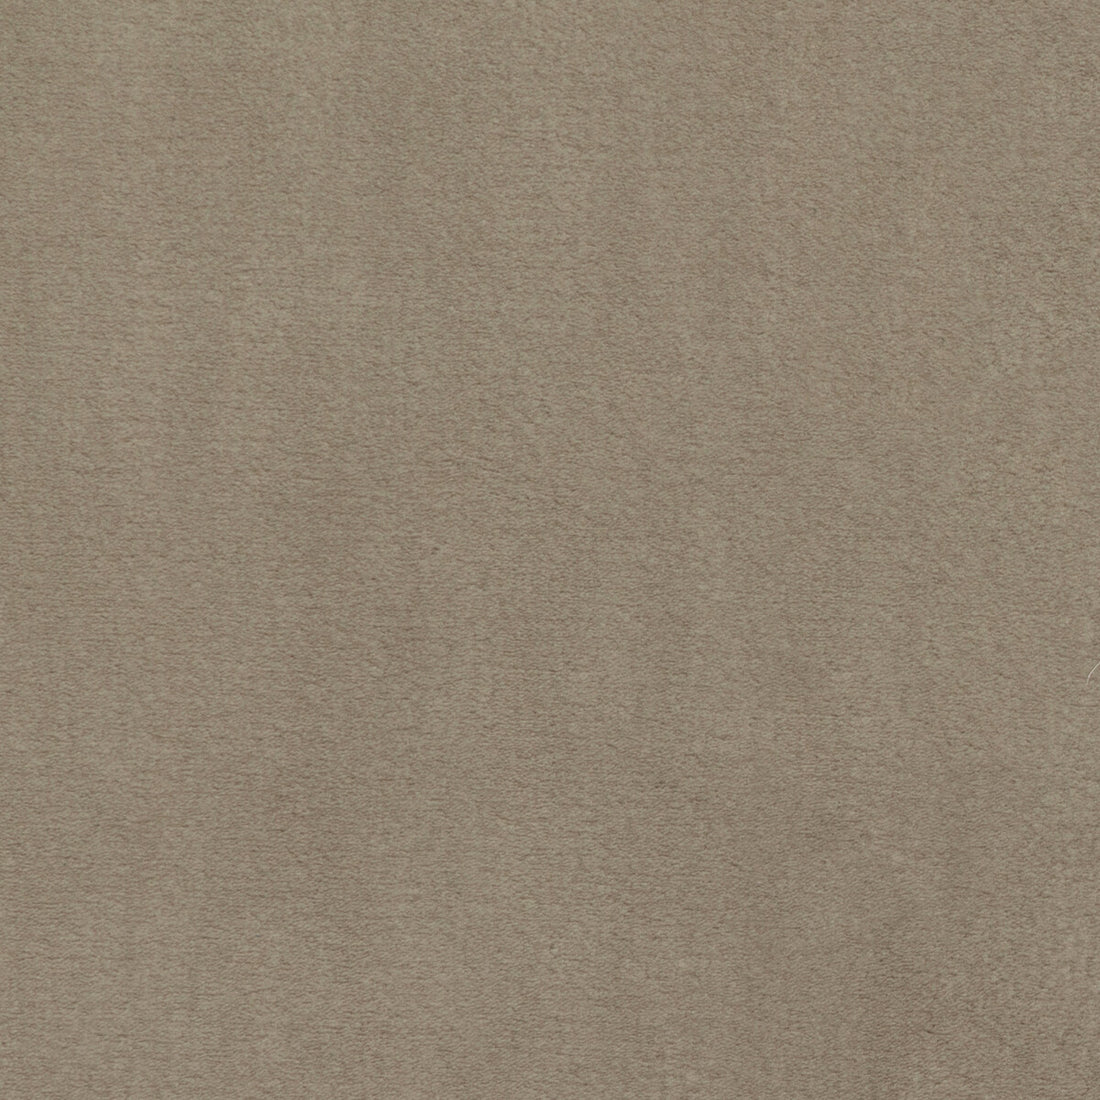 Plushilla fabric in beige color - pattern 36061.16.0 - by Kravet Basics in the Monterey collection